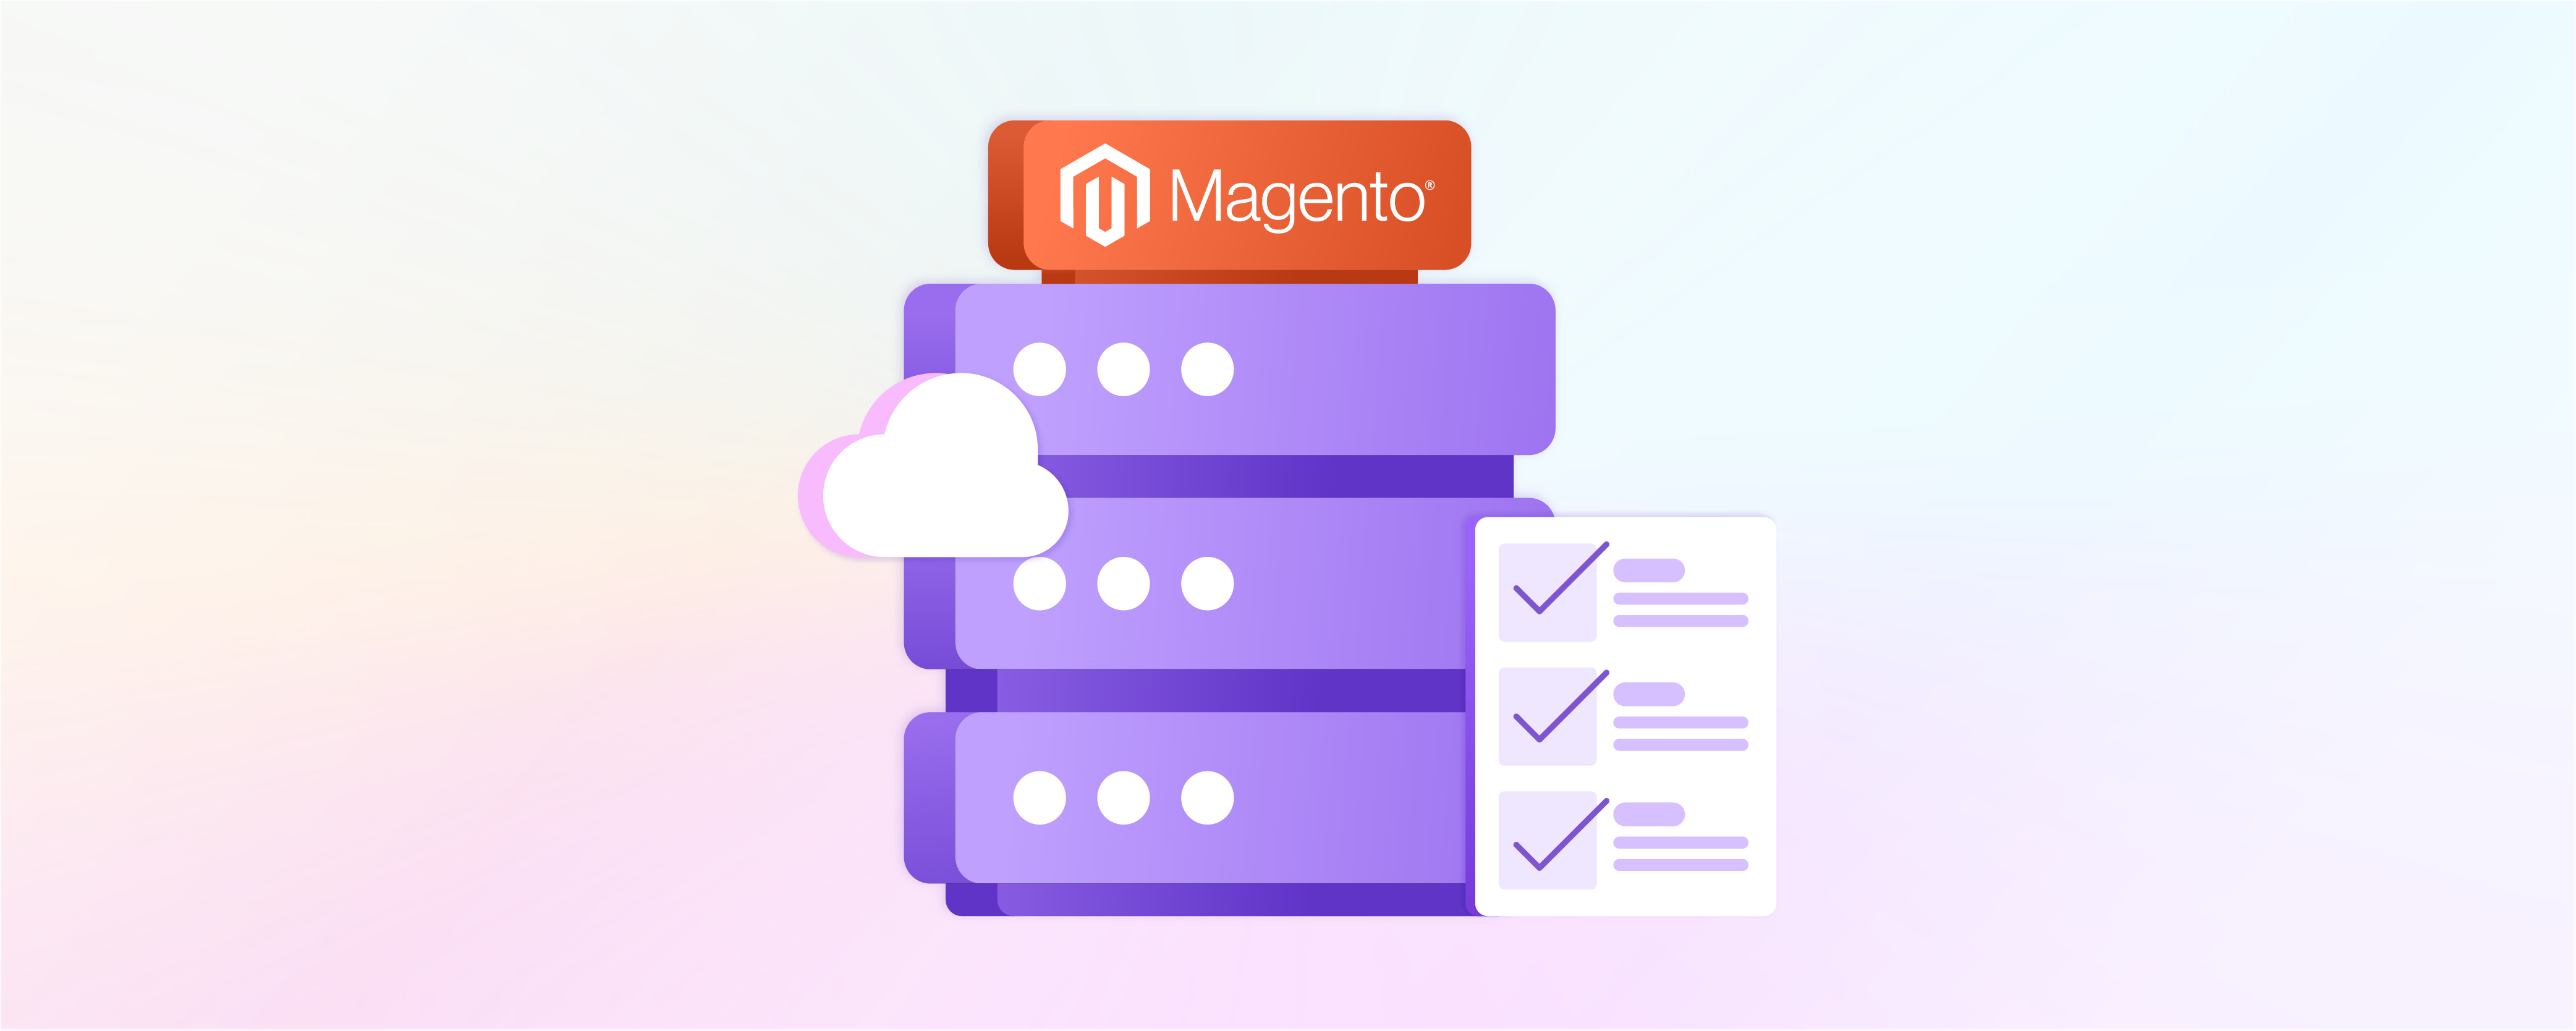 12 Top Considerations for Choosing the Best Magento Hosting